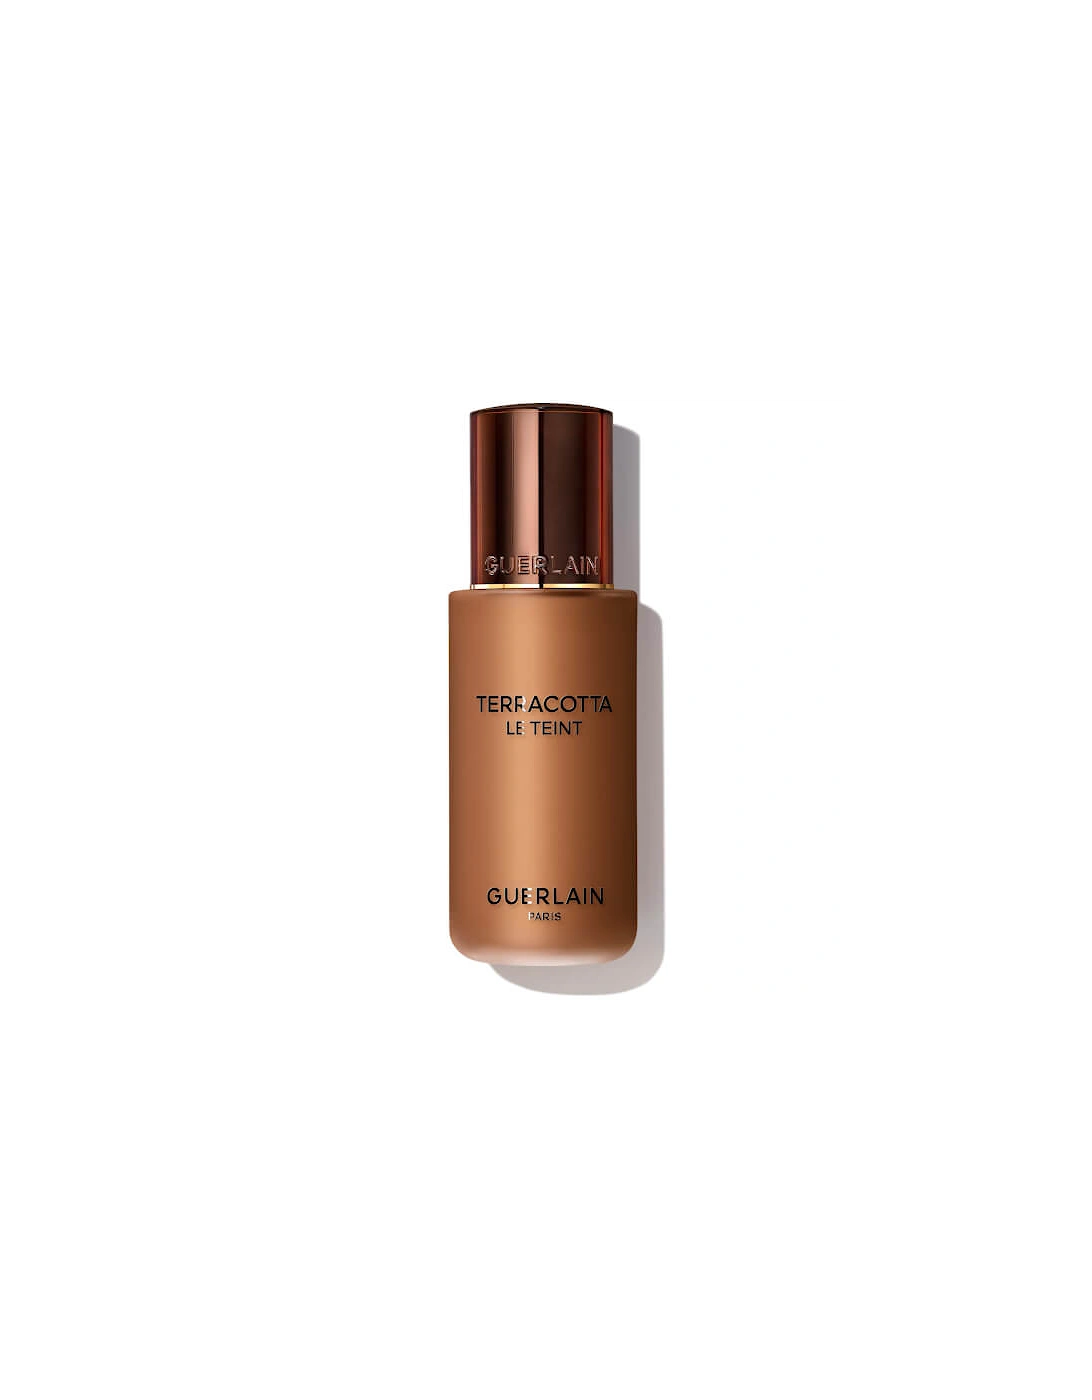 Terracotta Le Teint Healthy Glow Natural Perfection Foundation - 7W, 2 of 1